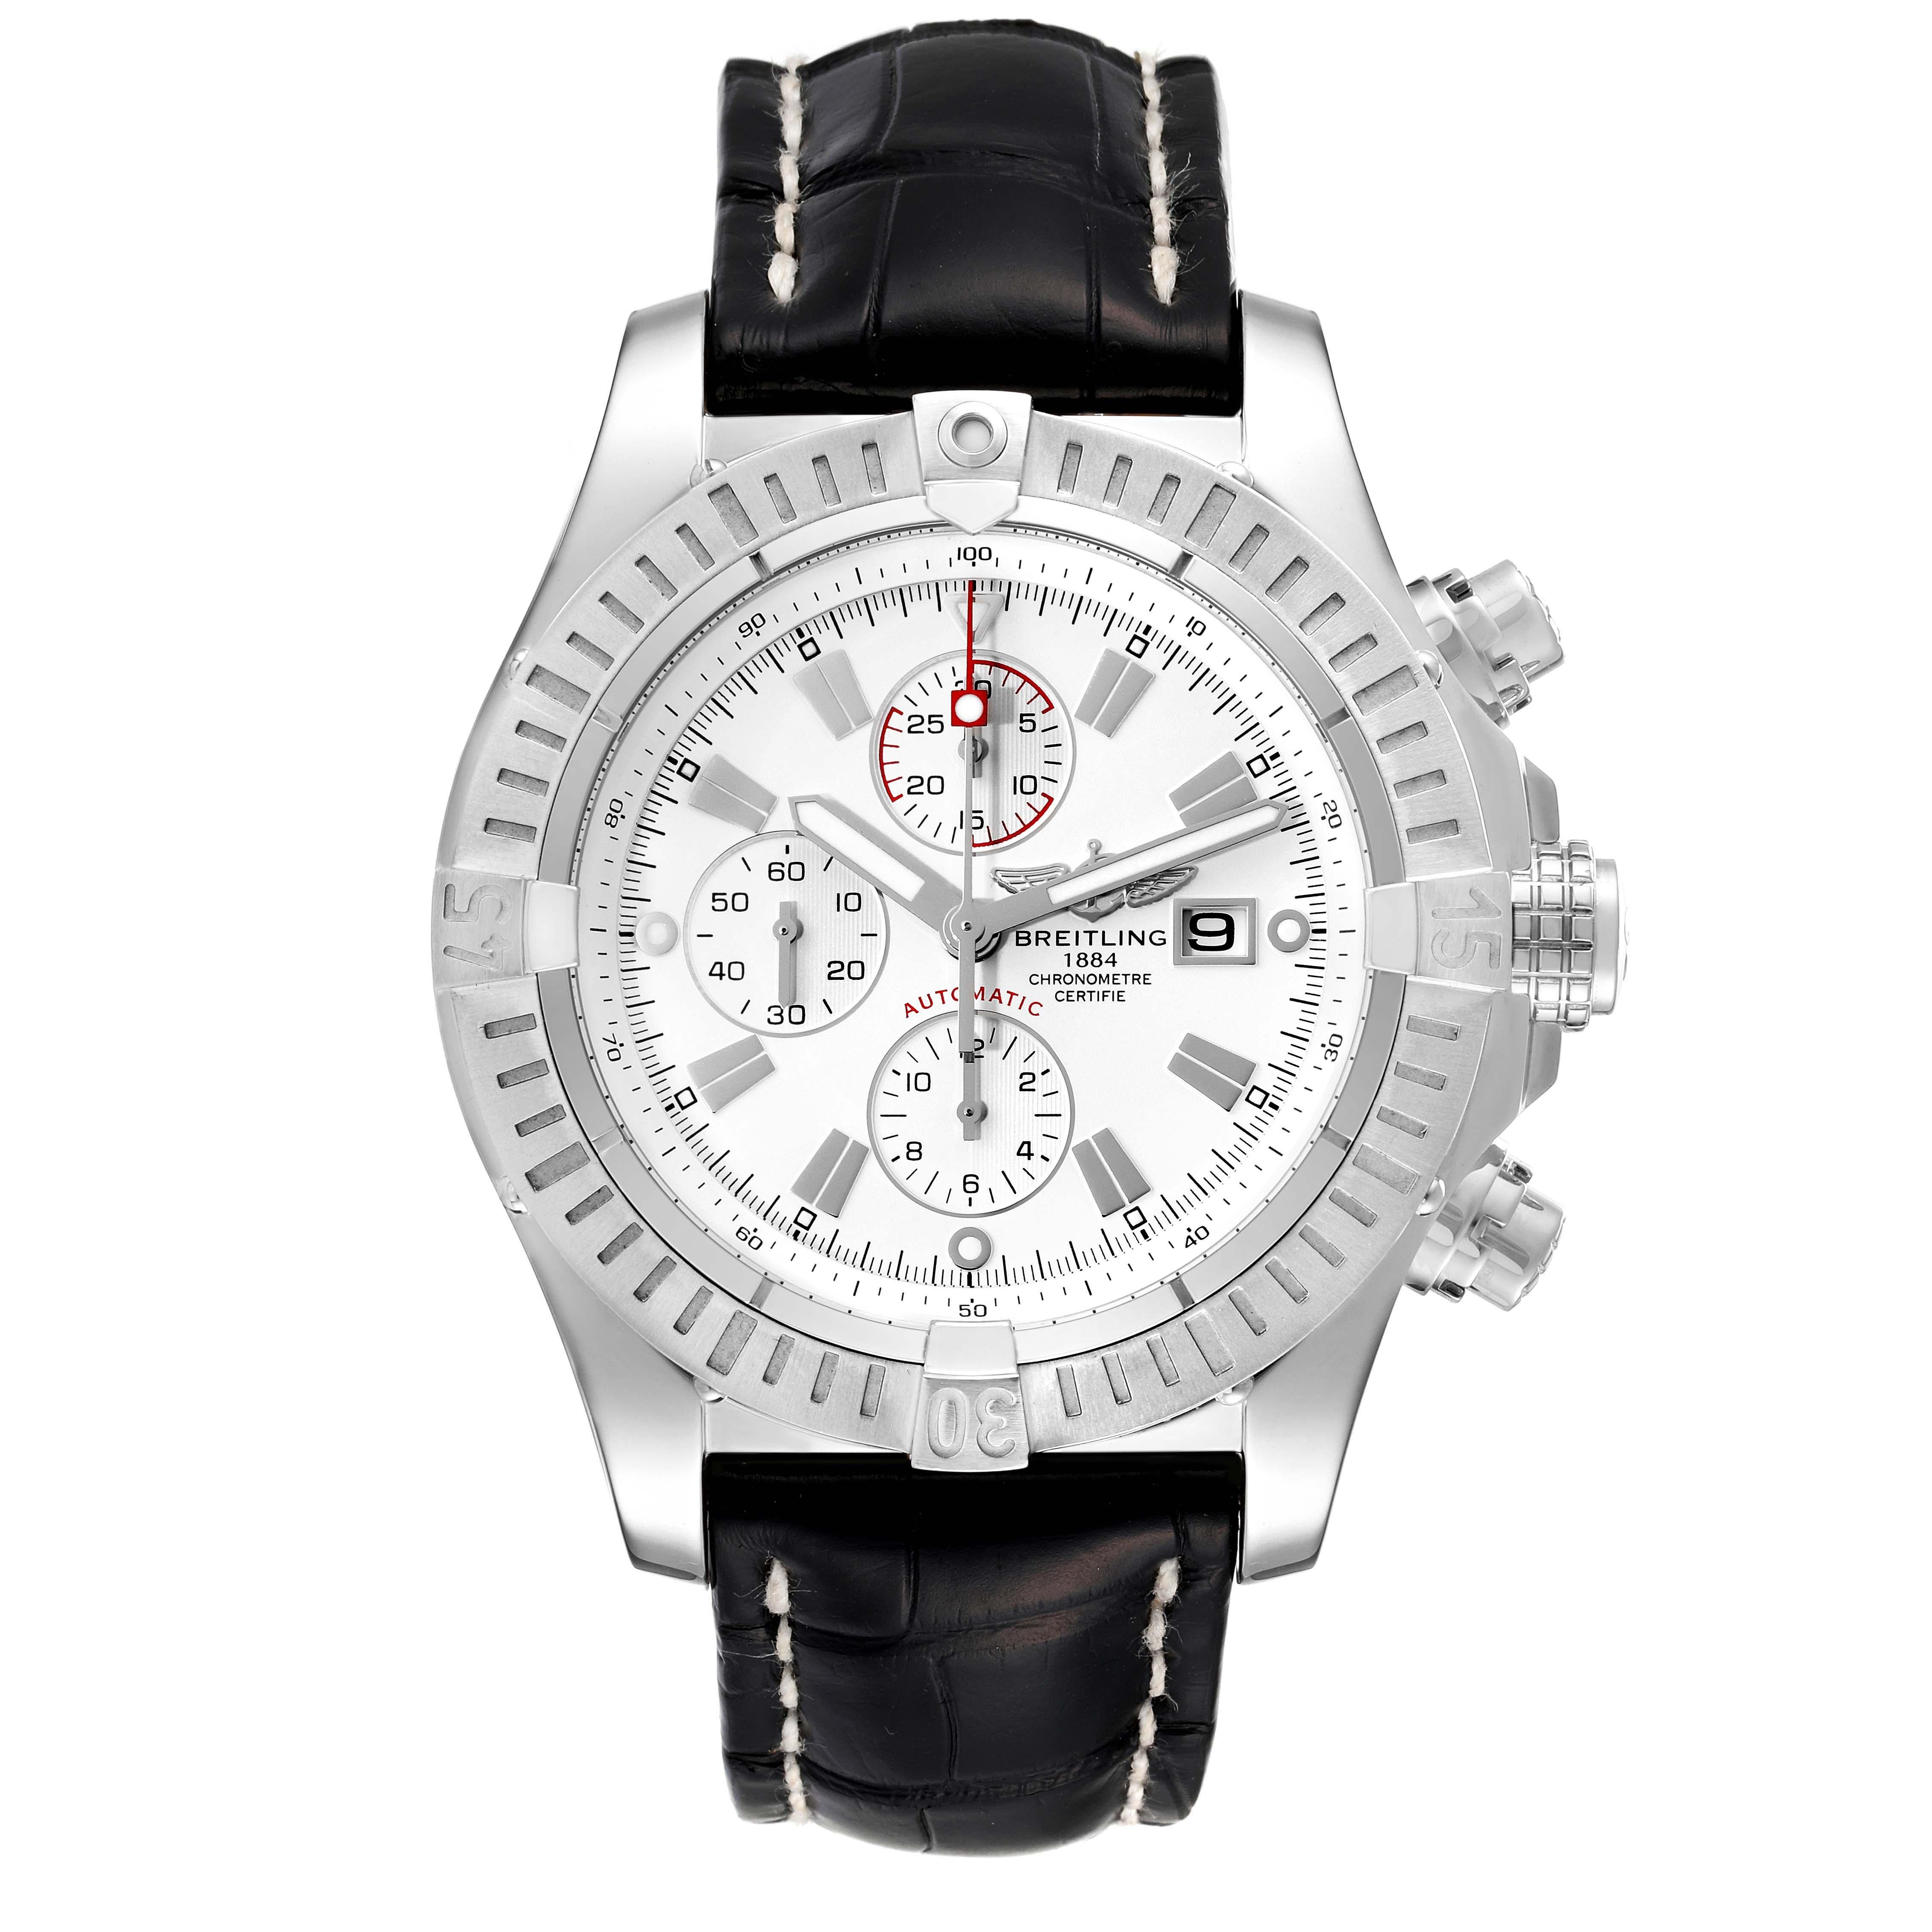 Breitling Super Avenger White Dial Chronograph Steel Mens Watch A13370. Automatic self-winding movement. Chronograph function. Stainless steel case 48.4 mm in diameter with screwed-locked crown and pushers. Stainless steel unidirectional rotating